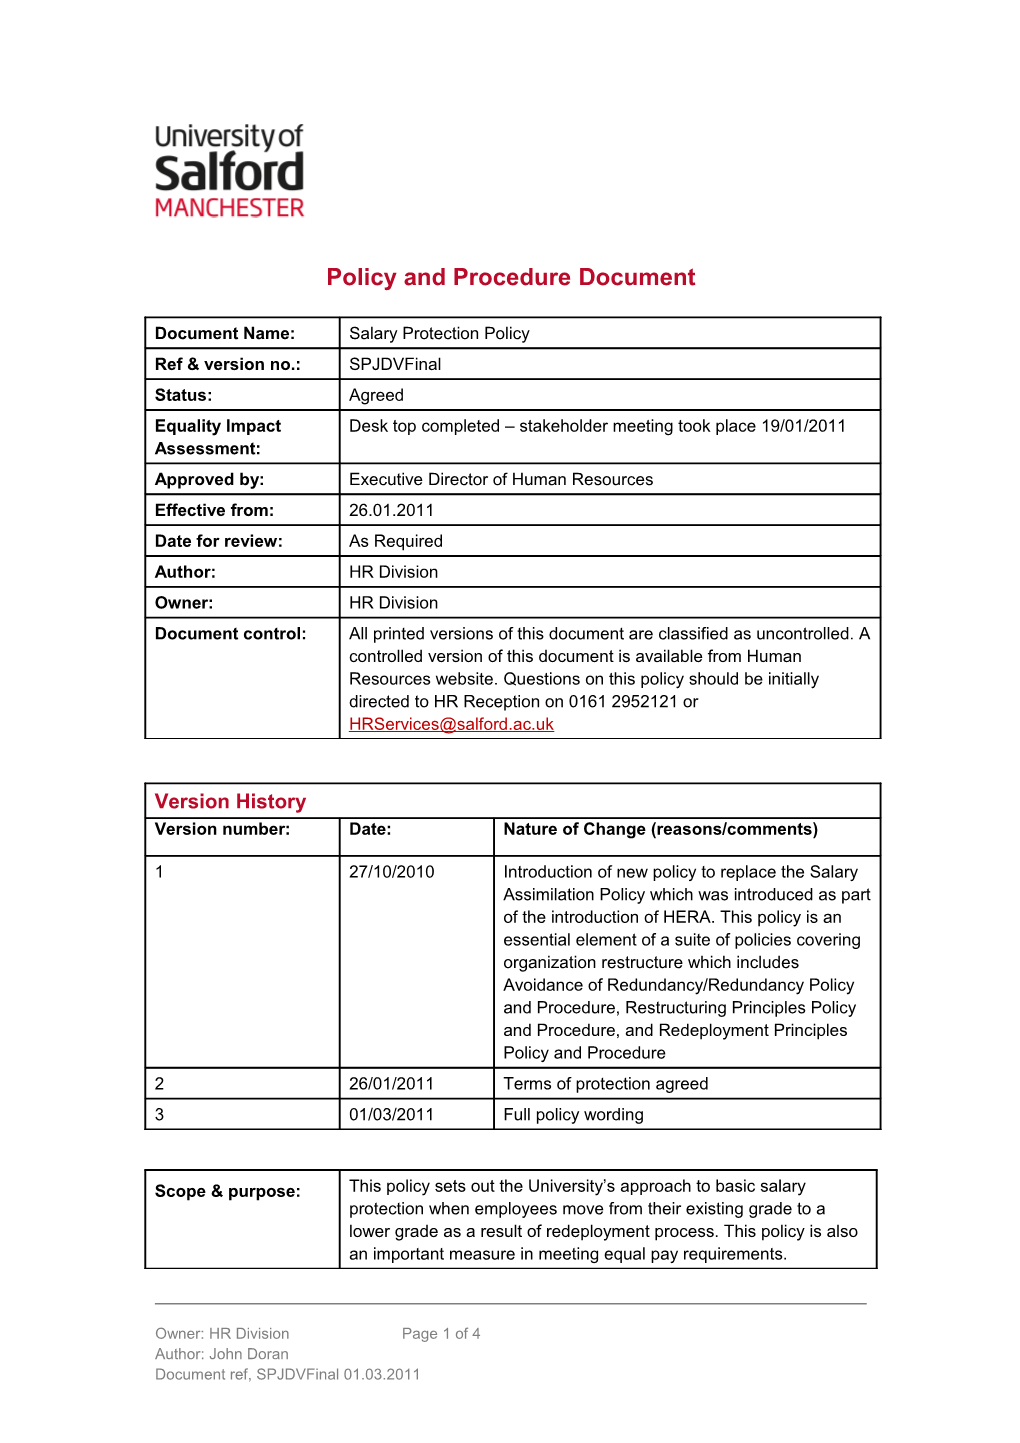 Policy and Procedure Document